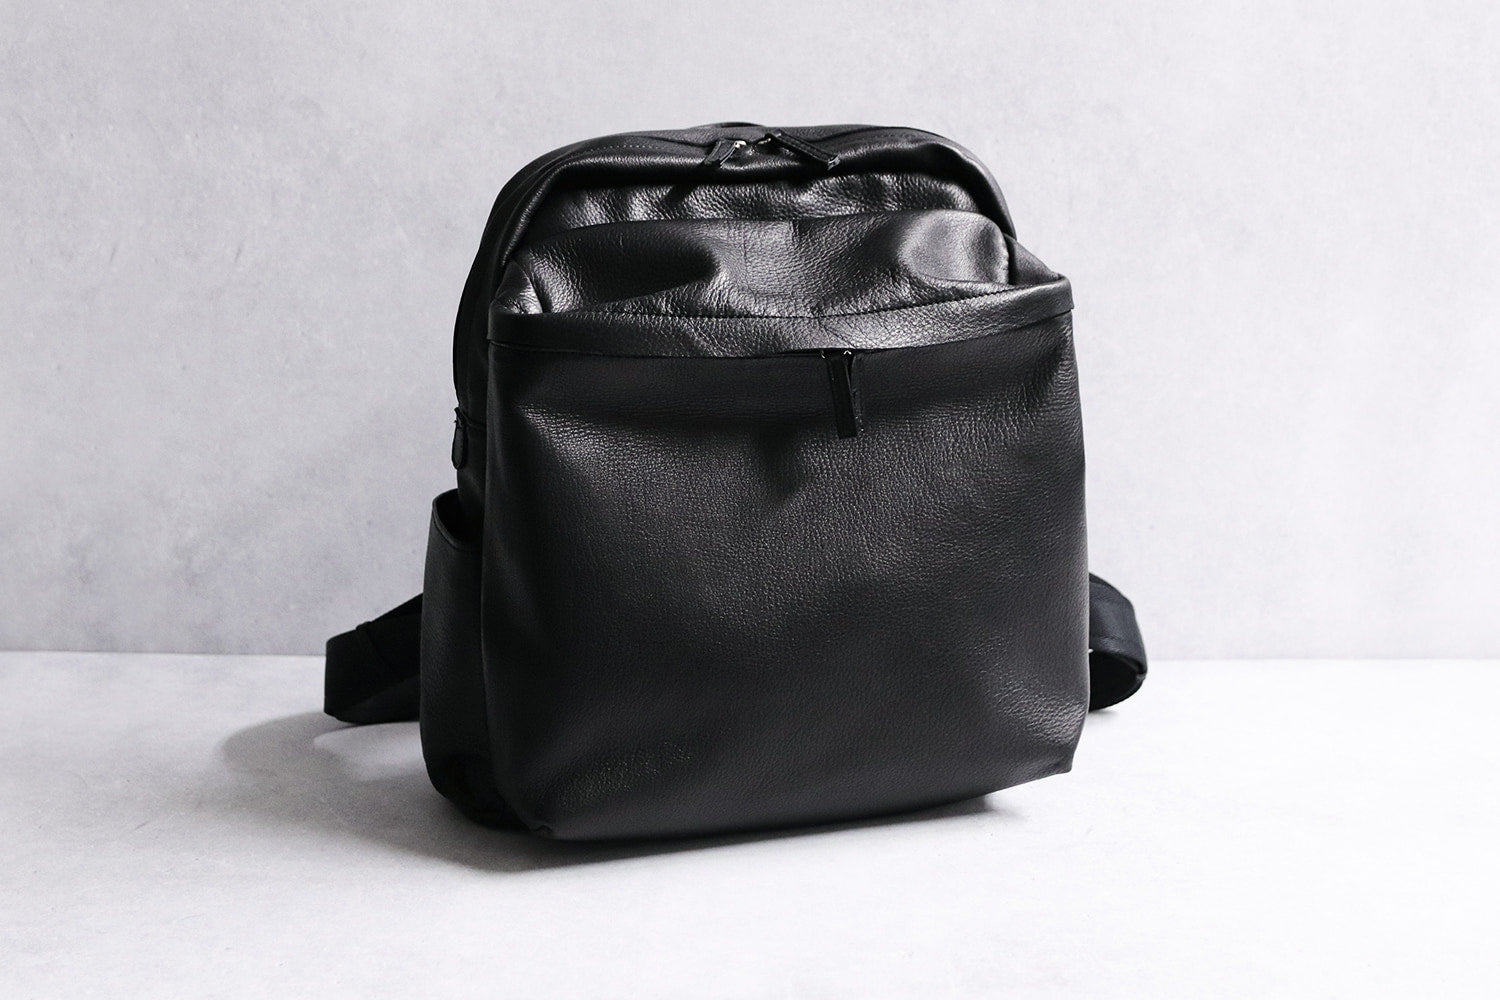 REALMIND / Machiyama Peace of mind even on rainy days! Let's go to the city/mountain with a waterproof leather backpack made of cowhide (genuine leather). 